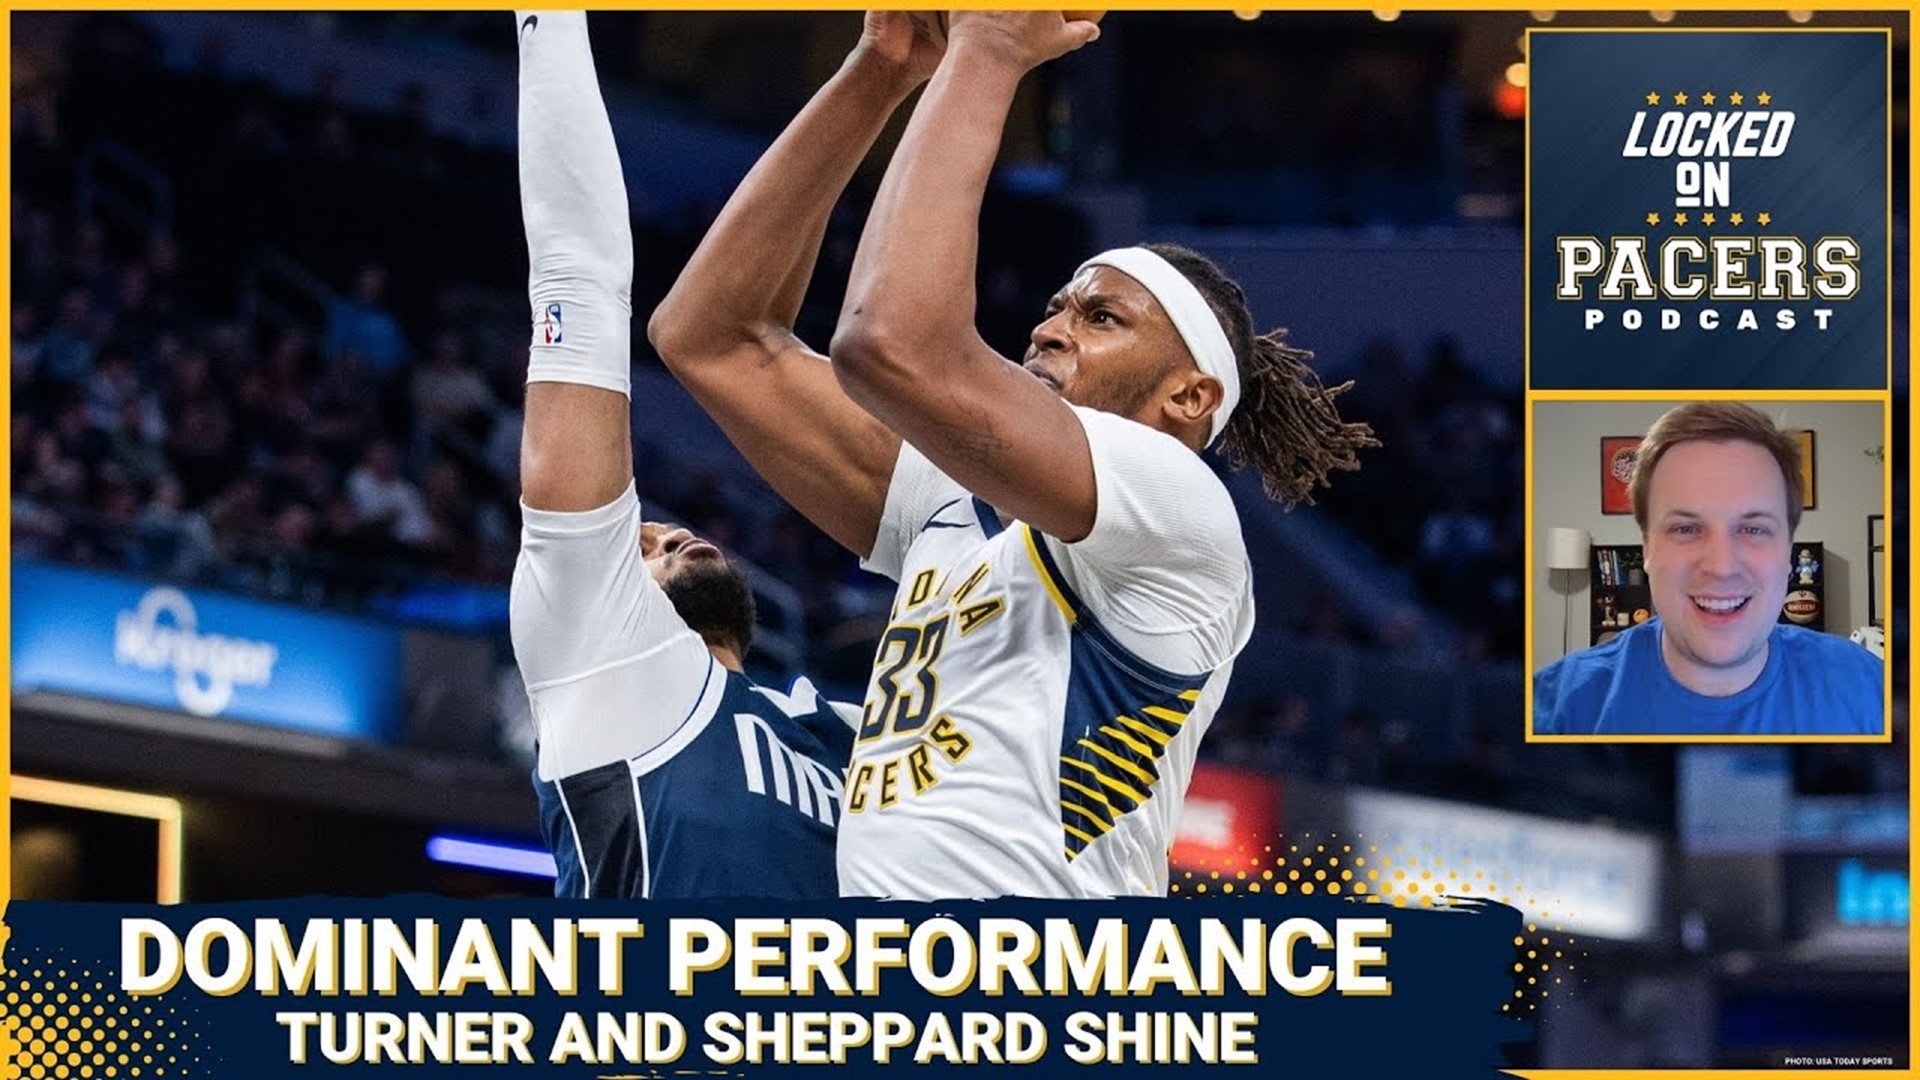 Myles Turner and Ben Sheppard shine as Indiana Pacers get impressive win over Dallas Mavericks